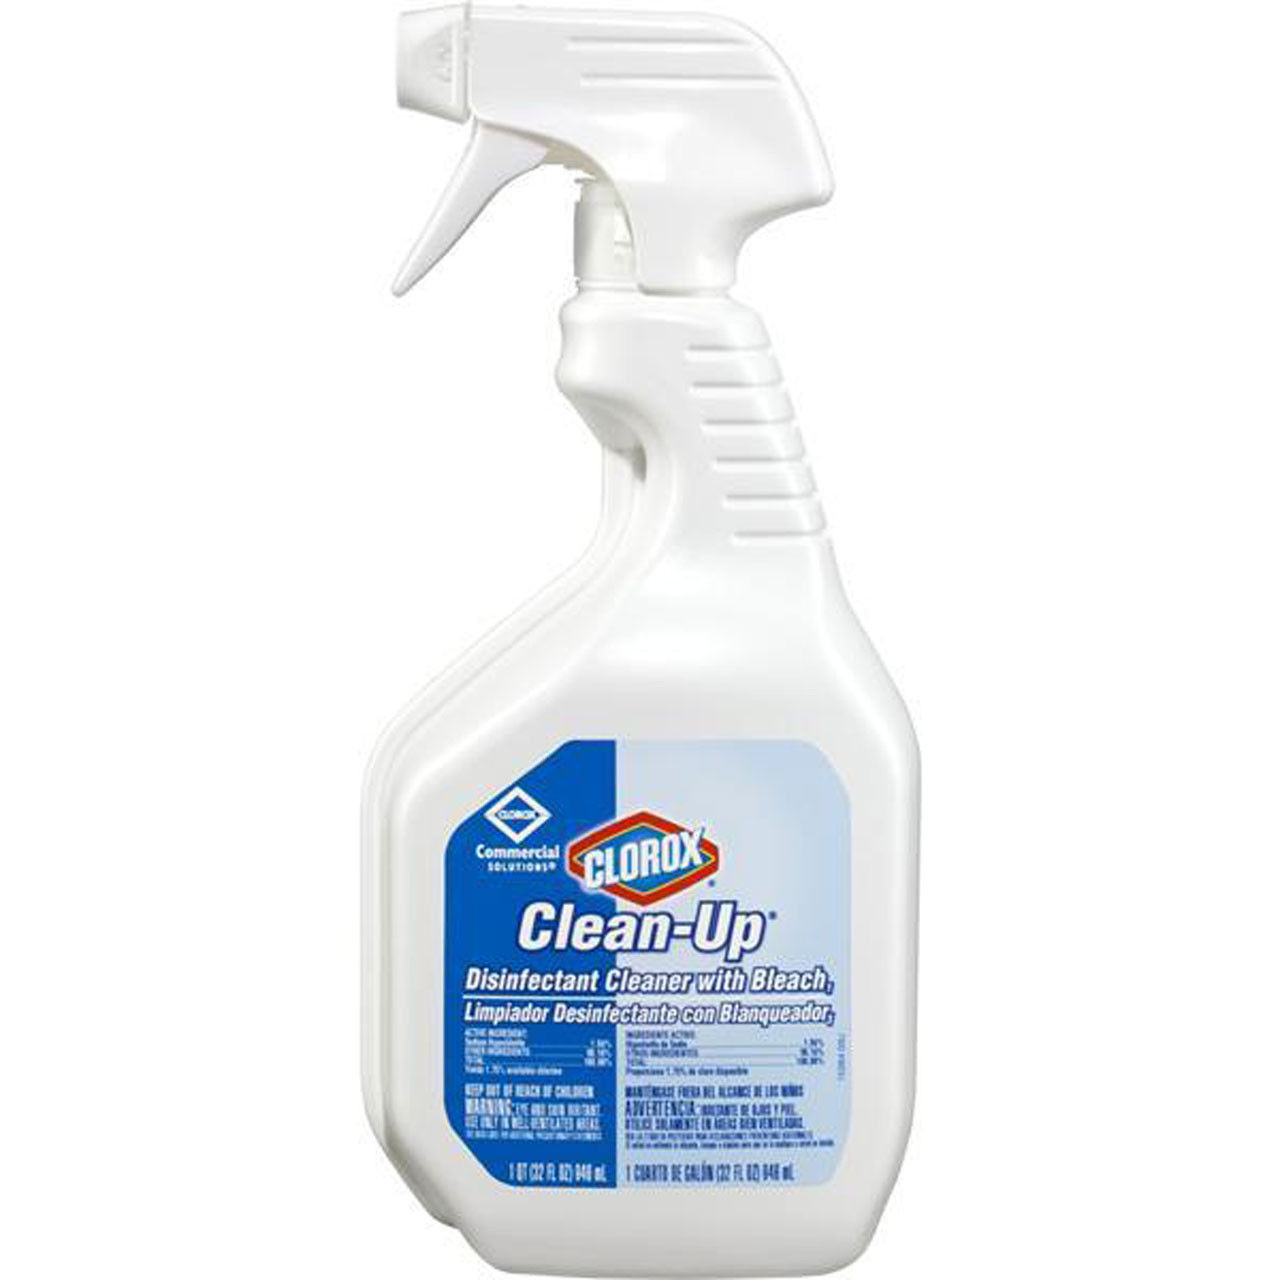 What are the order options for Clorox Clean-Up the disinfectant spray cleaner with bleach?